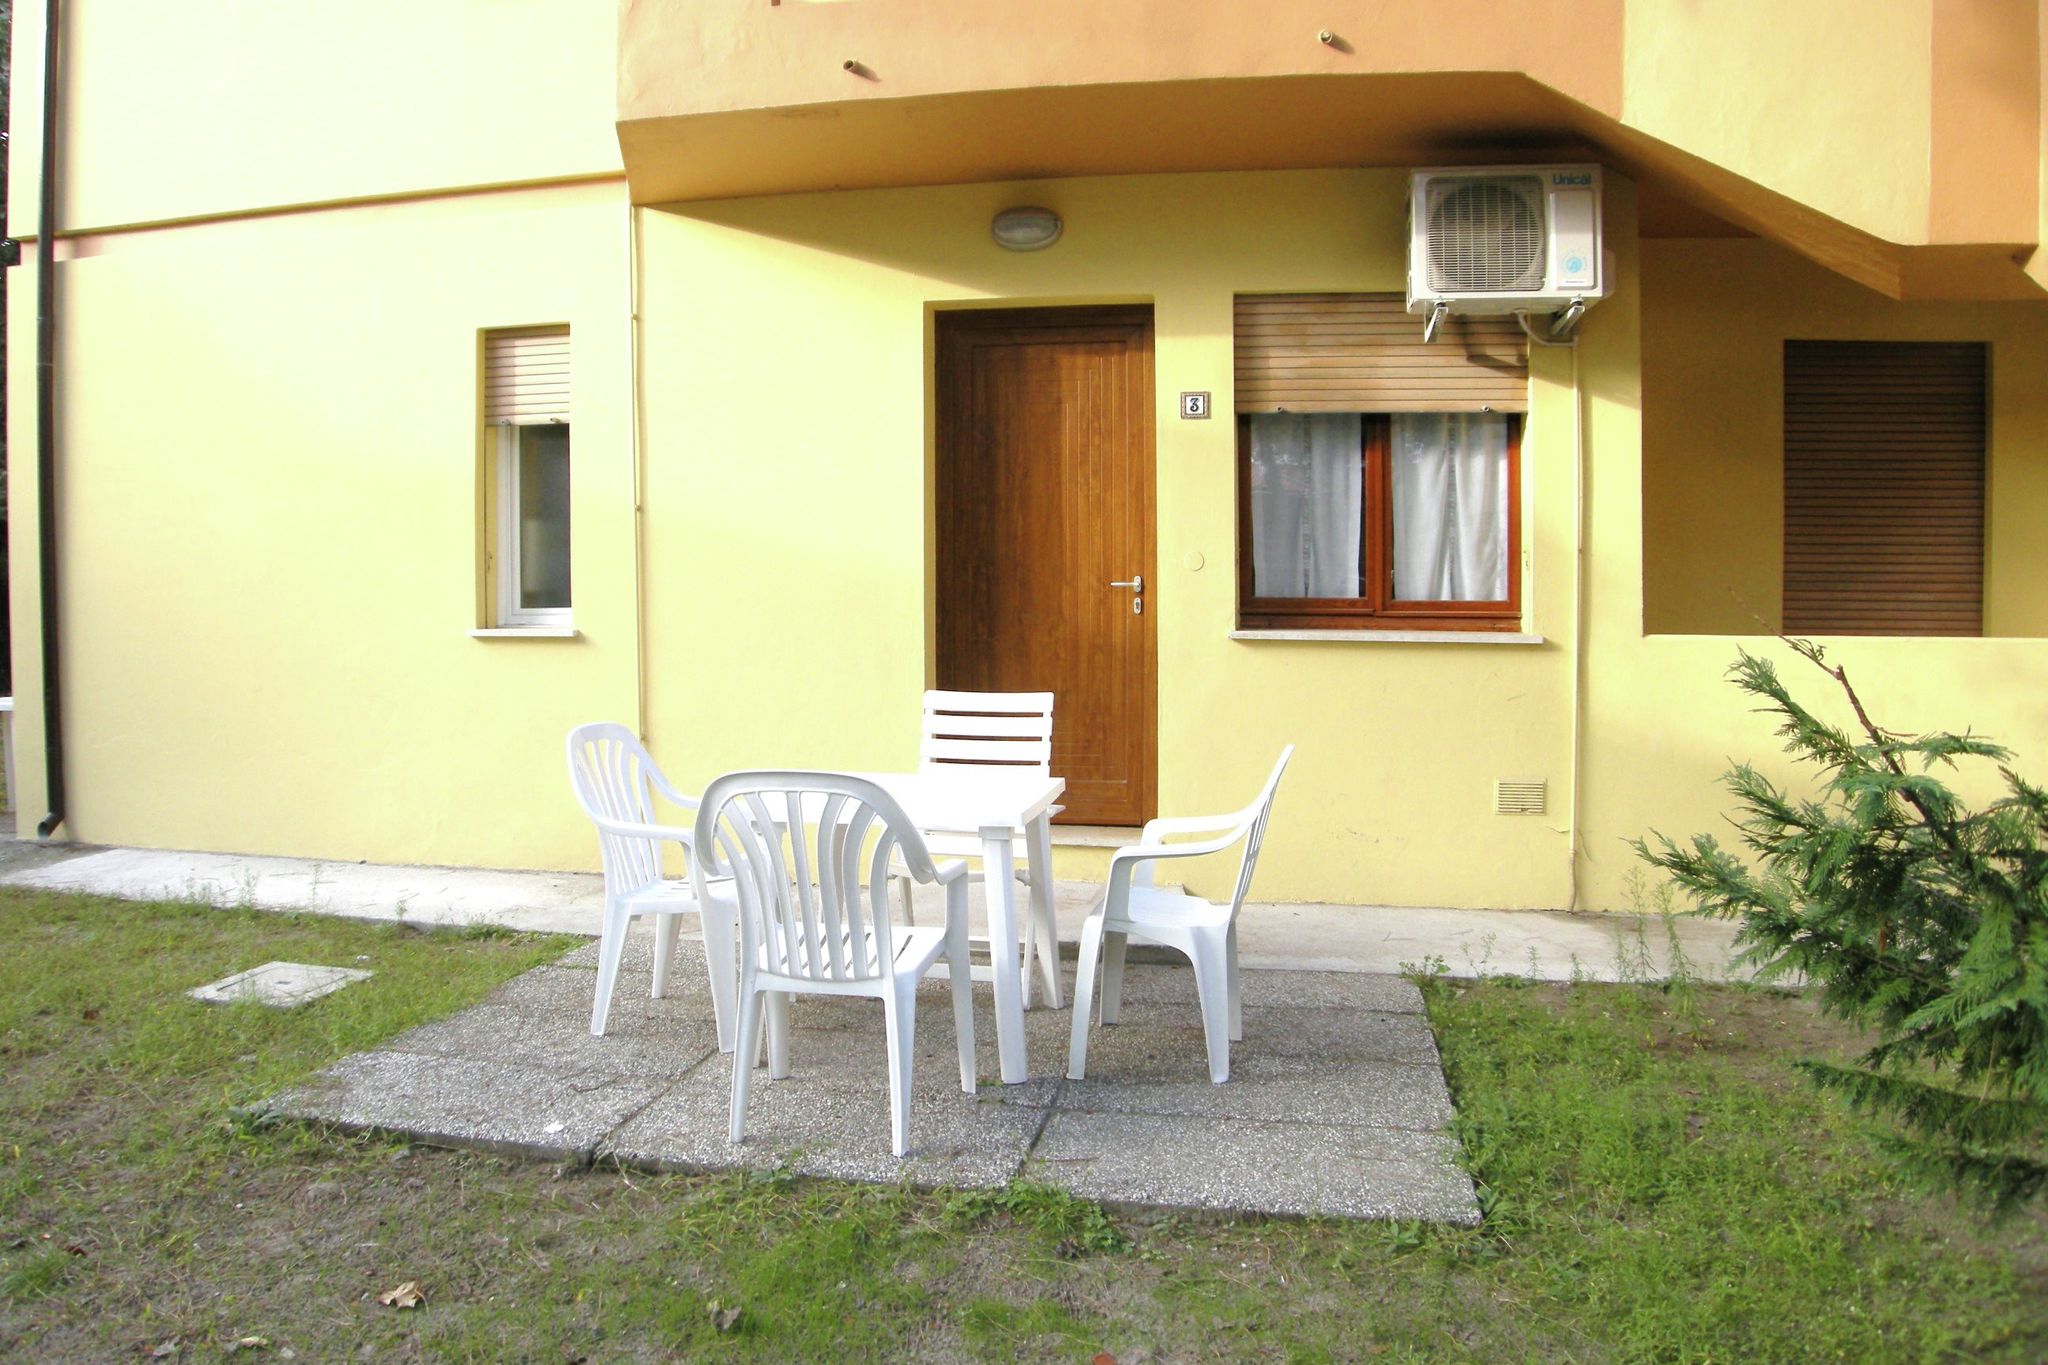 Sundrenched holiday house, 250 m far from the beach in Rosolina Mare, near Venice